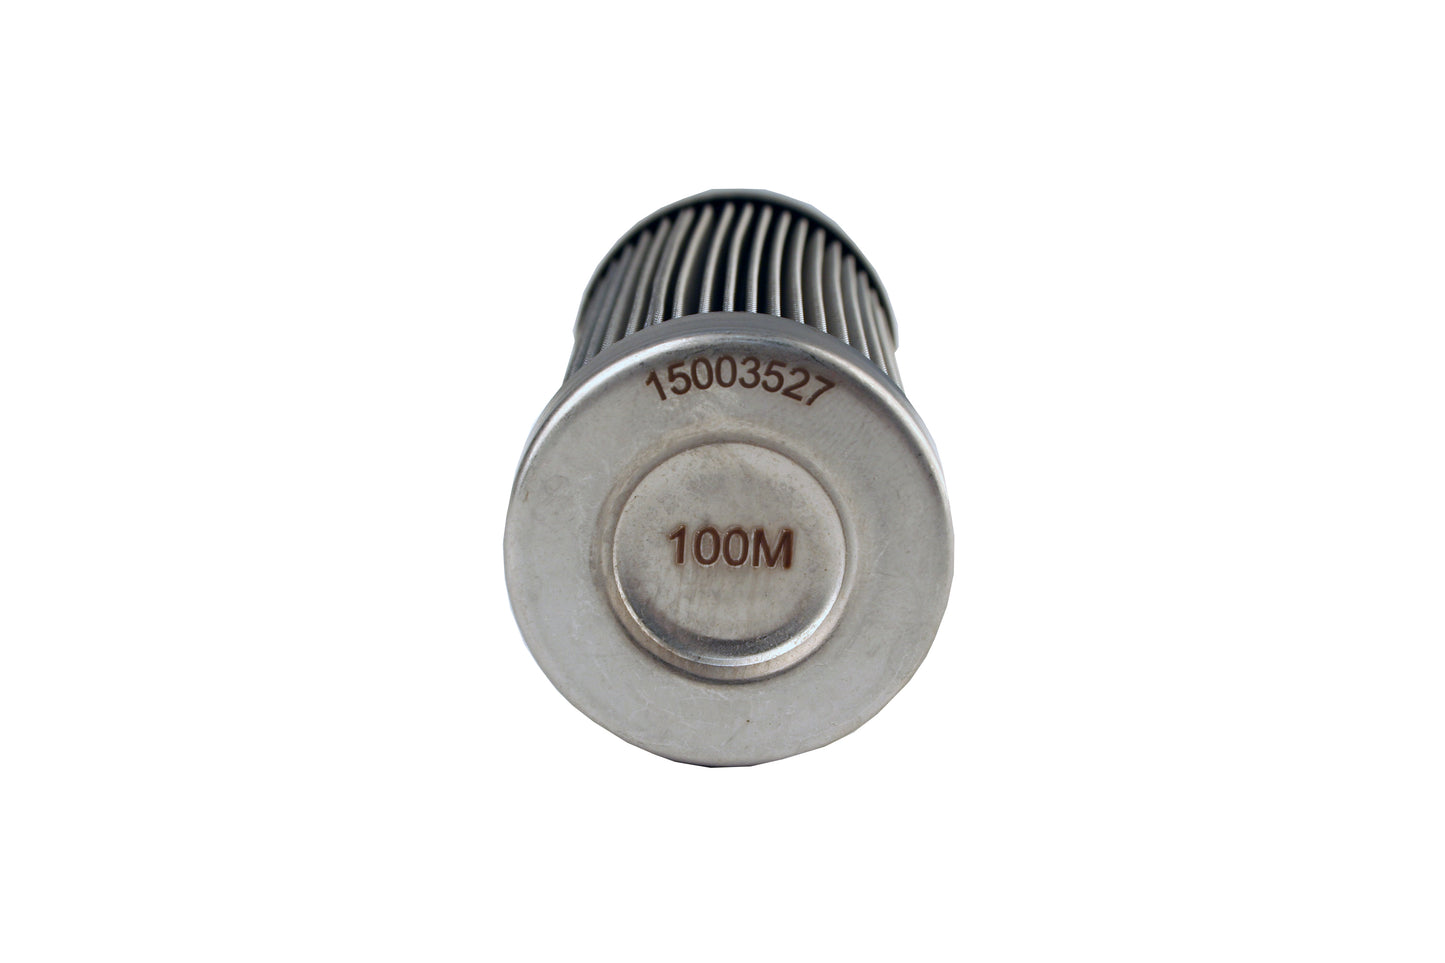 100-micron Stainless Steel Bulkhead Fuel Filter, AN-12 Male Flare